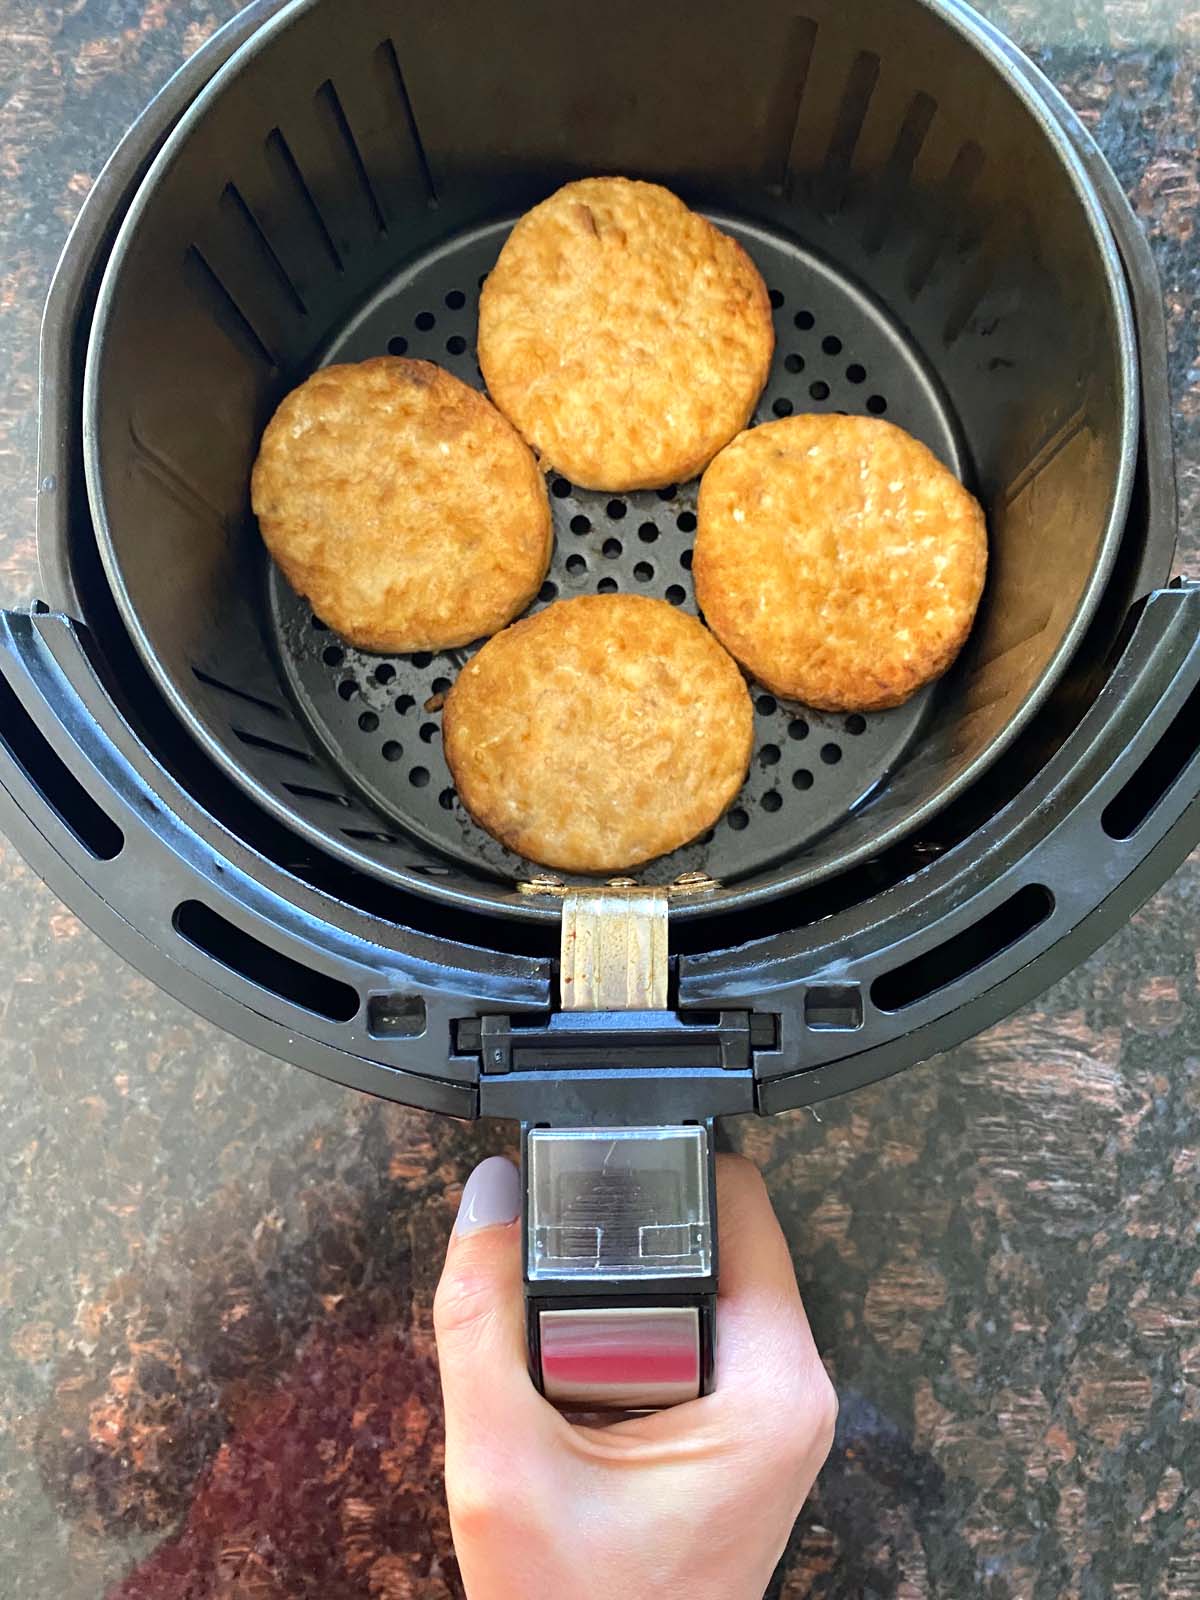 Cooked salmon burgers in the air fryer.